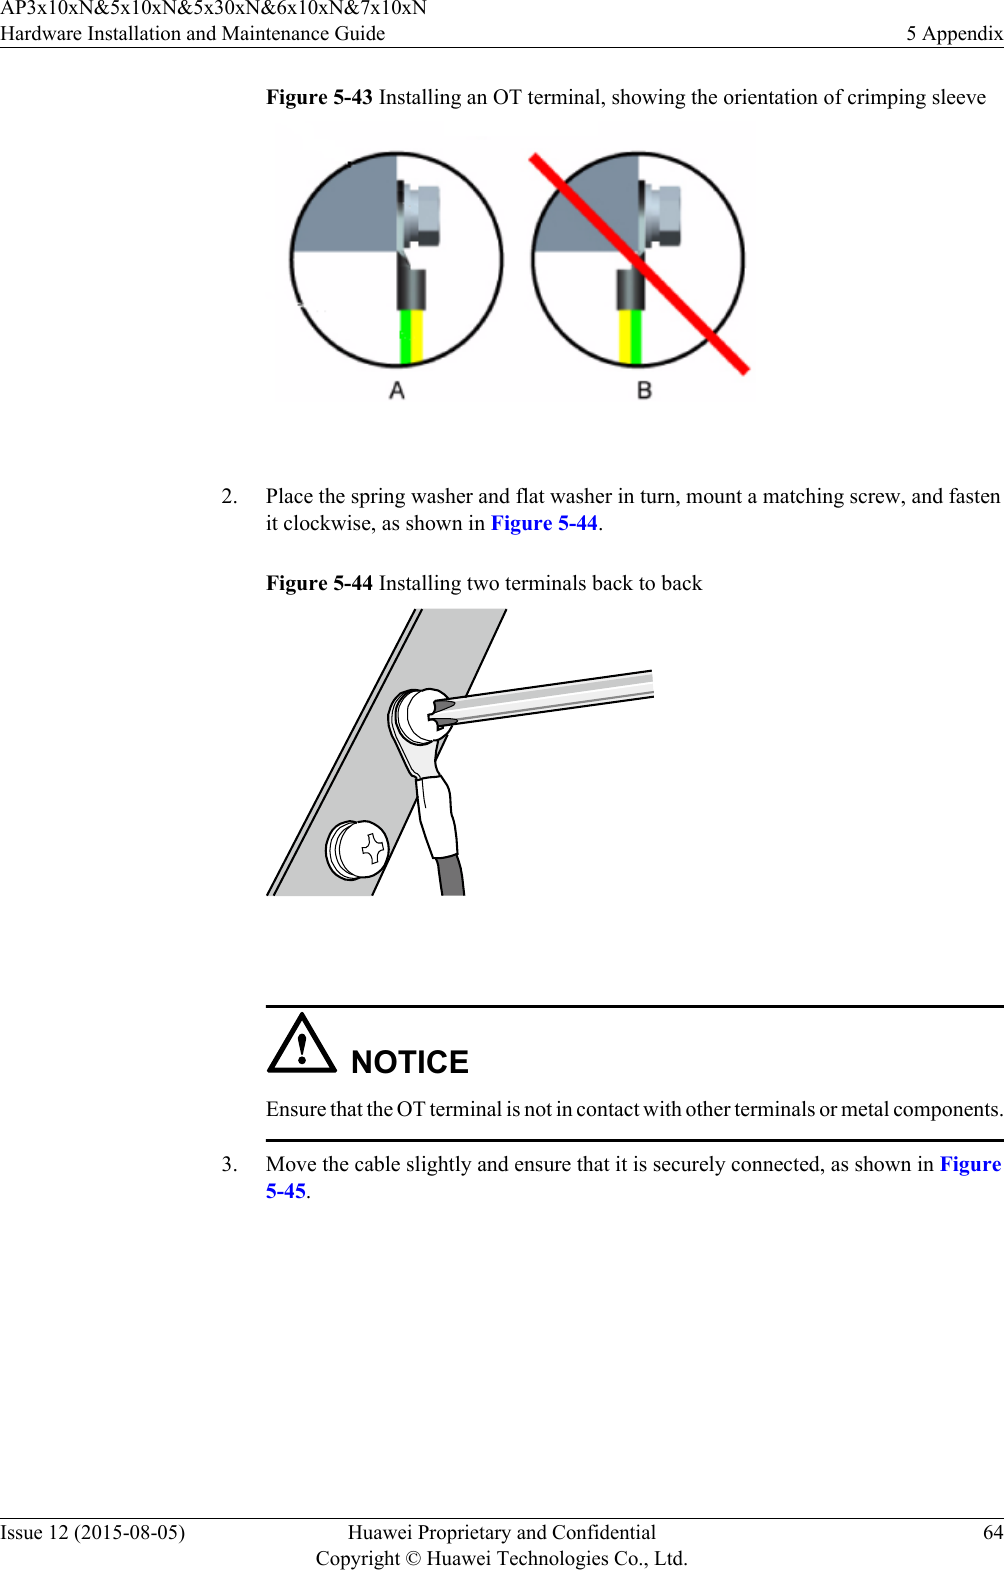 Figure 5-43 Installing an OT terminal, showing the orientation of crimping sleeve 2. Place the spring washer and flat washer in turn, mount a matching screw, and fastenit clockwise, as shown in Figure 5-44.Figure 5-44 Installing two terminals back to back NOTICEEnsure that the OT terminal is not in contact with other terminals or metal components.3. Move the cable slightly and ensure that it is securely connected, as shown in Figure5-45.AP3x10xN&amp;5x10xN&amp;5x30xN&amp;6x10xN&amp;7x10xNHardware Installation and Maintenance Guide 5 AppendixIssue 12 (2015-08-05) Huawei Proprietary and ConfidentialCopyright © Huawei Technologies Co., Ltd.64